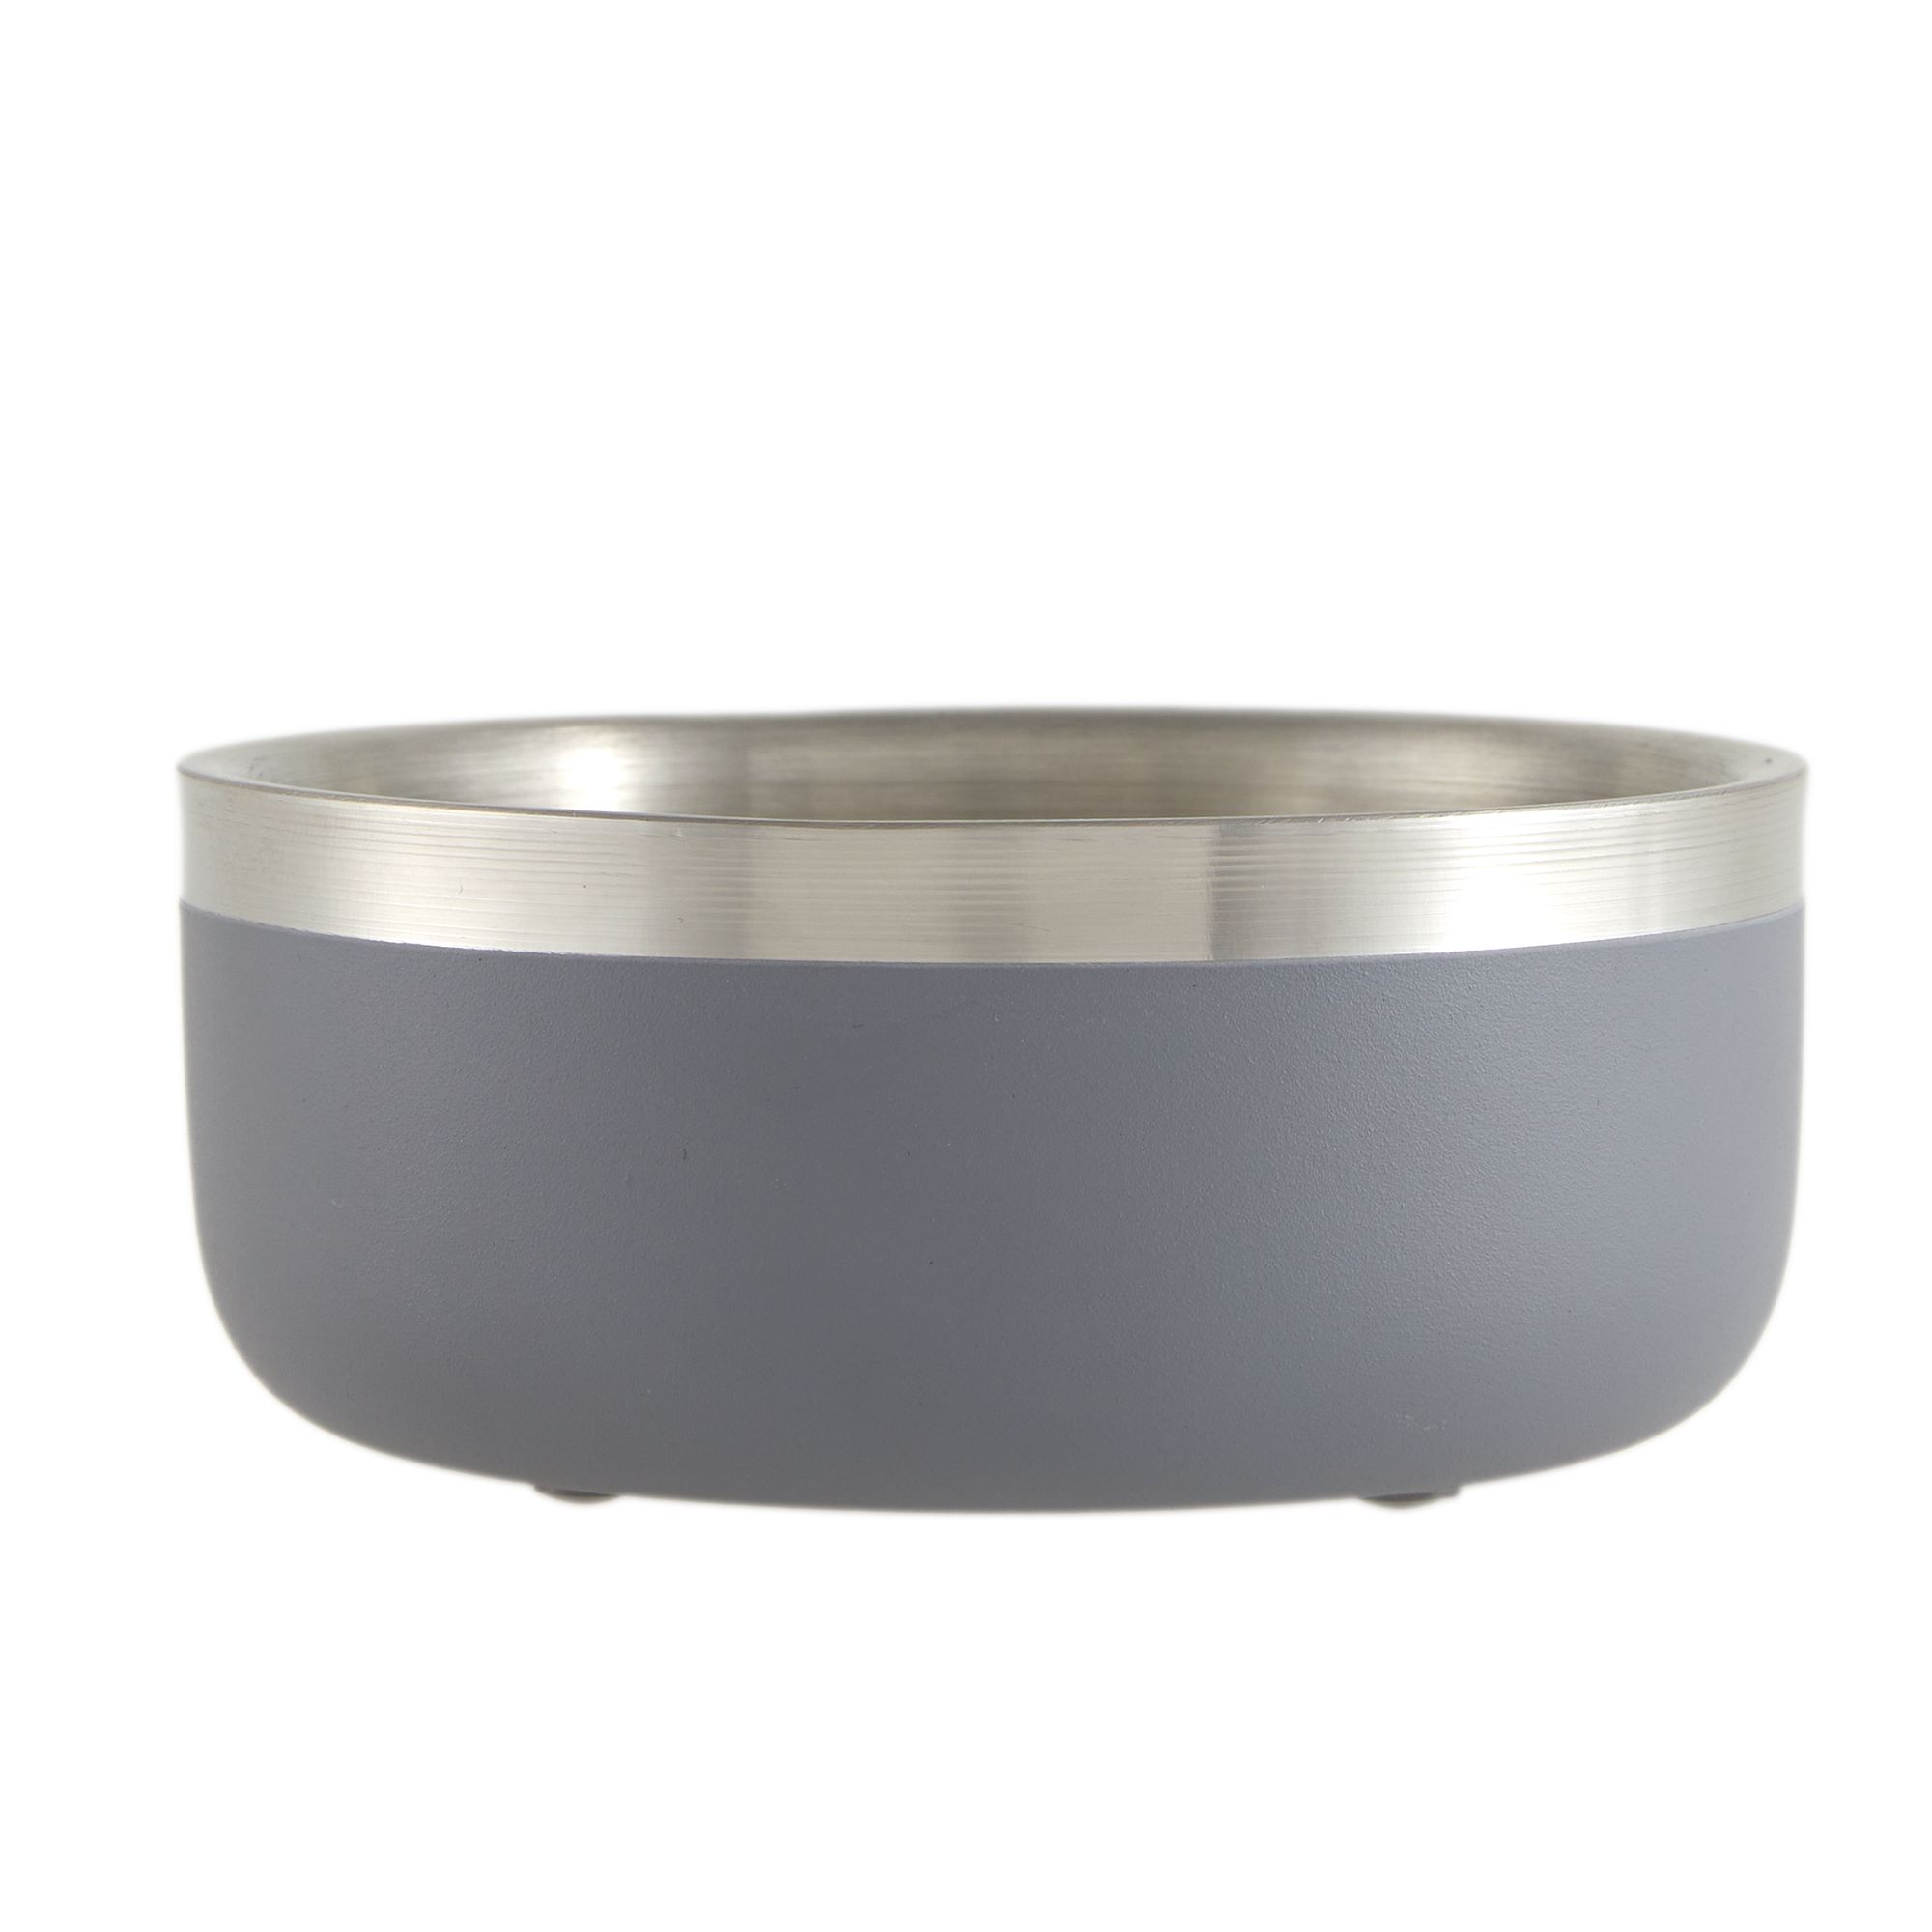 Insulated Weighted Bowl